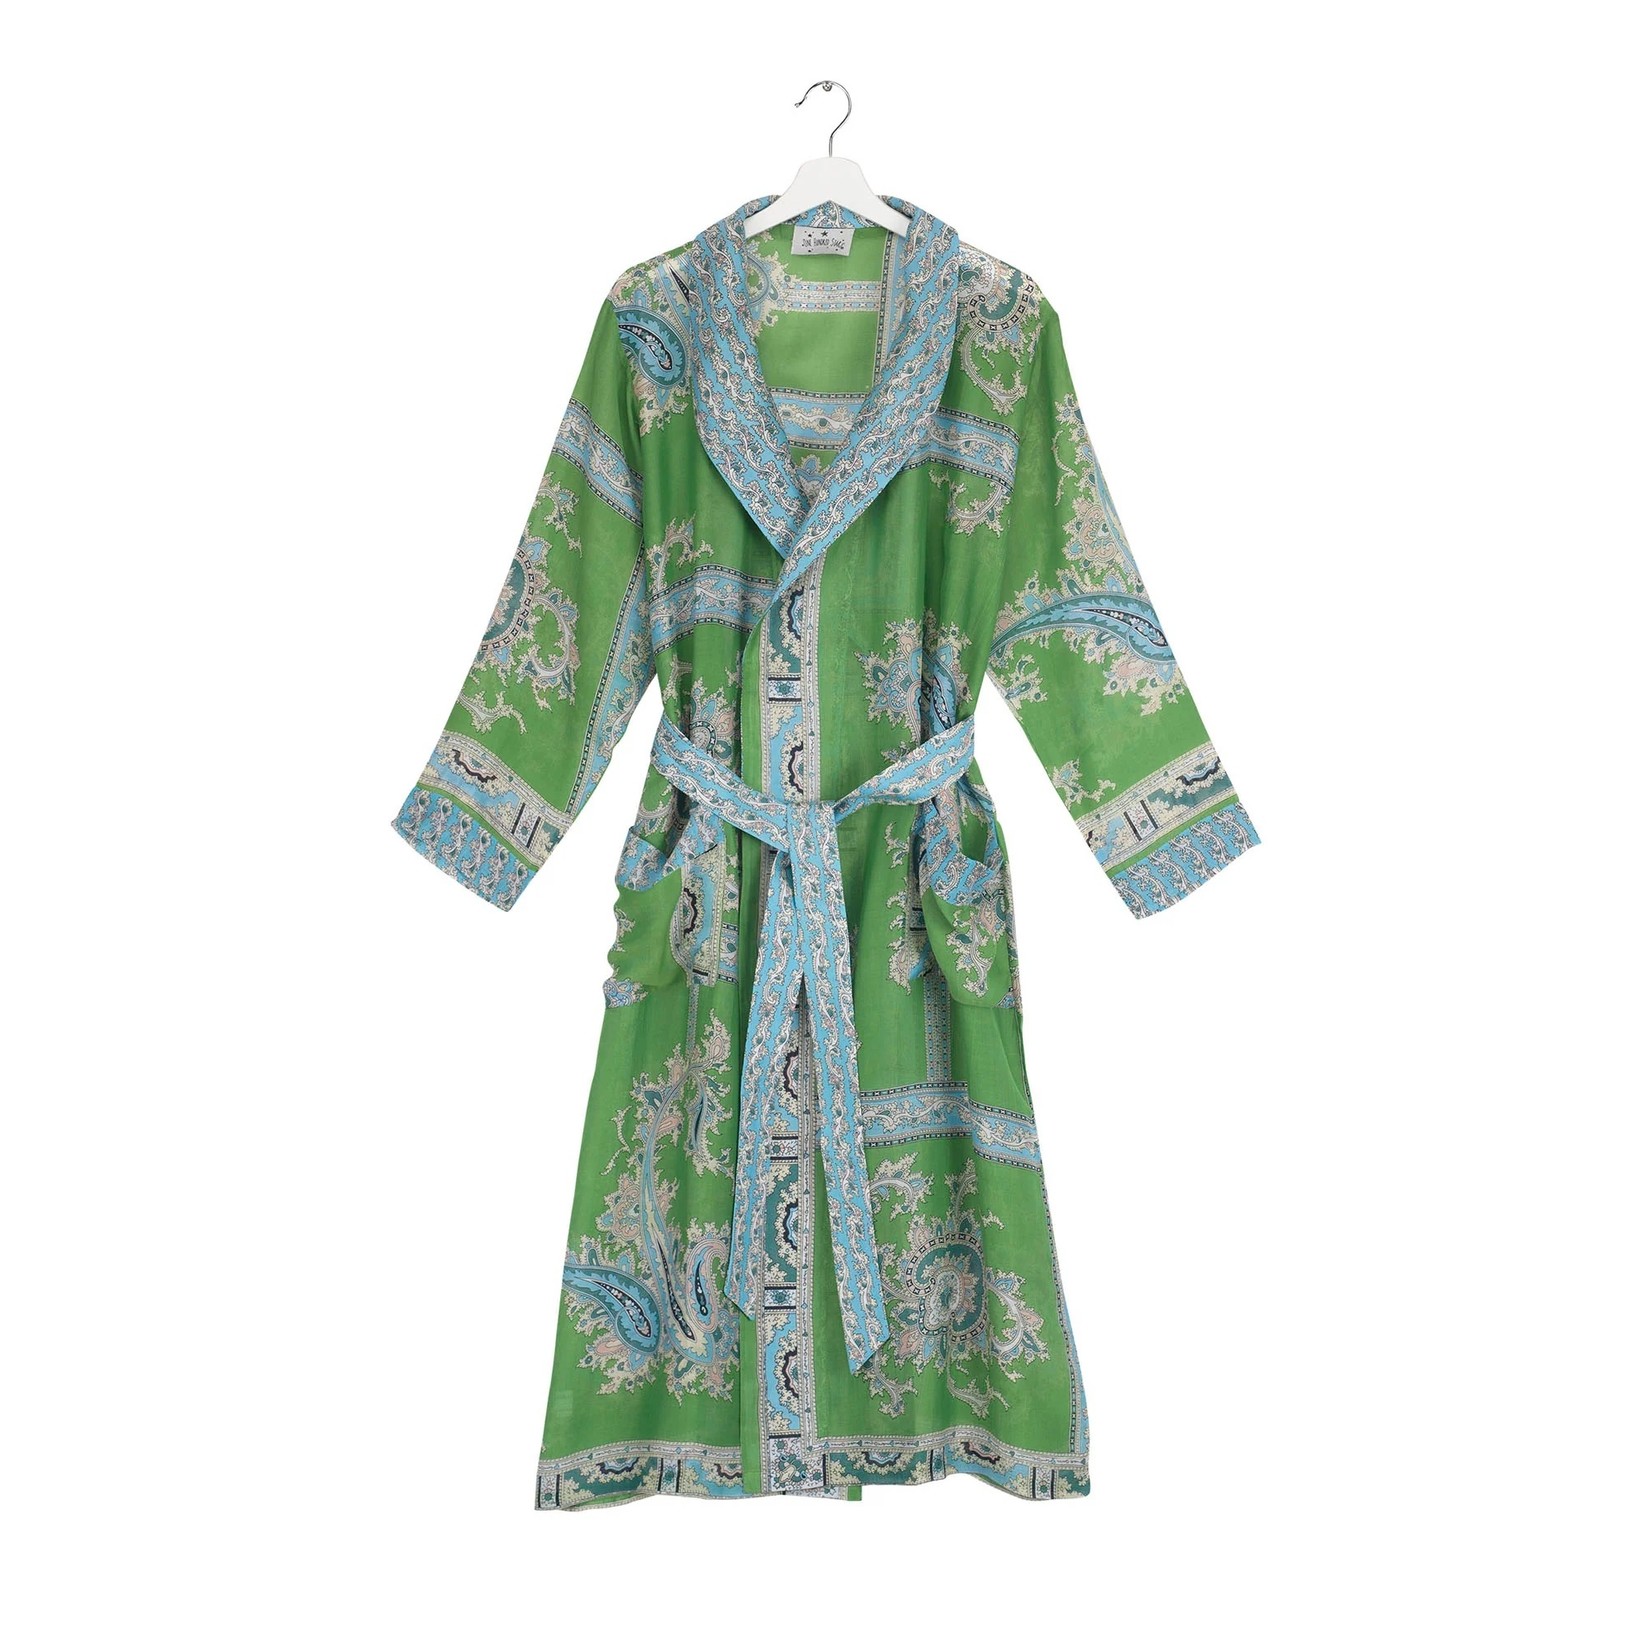 Two's Company, Inc. Robe Gown